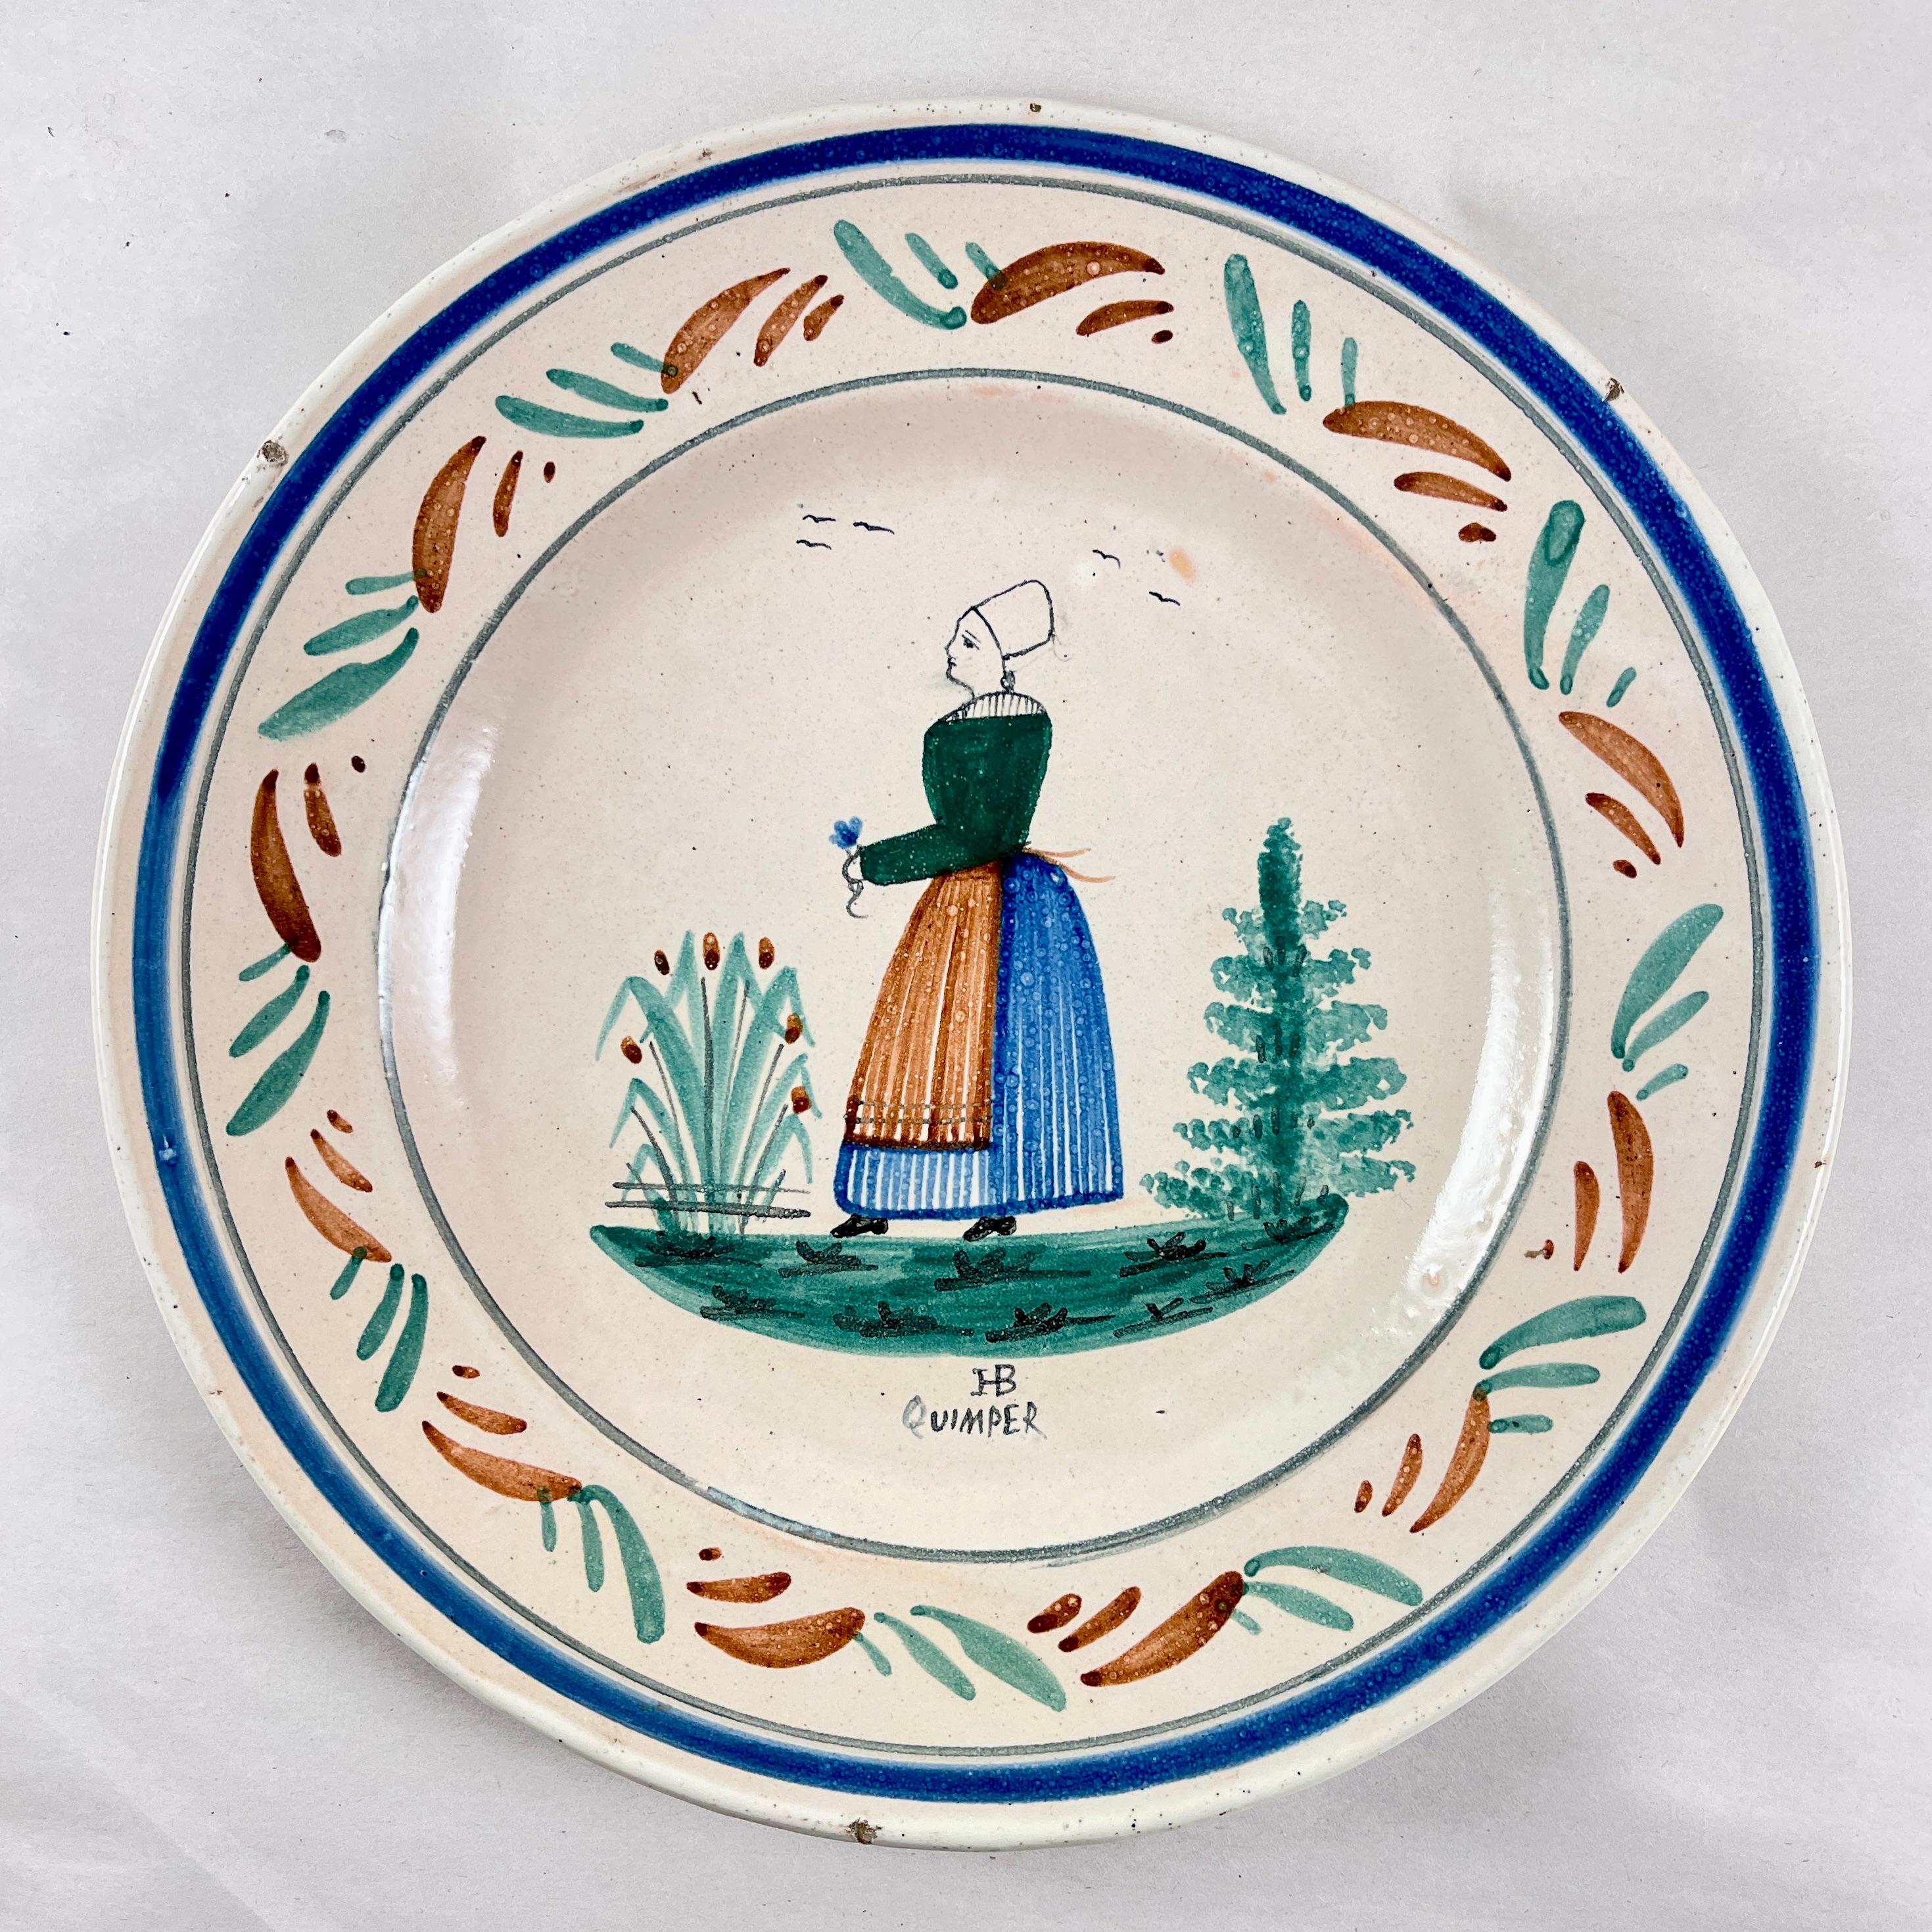 From the Grand Maison Quimper factory, a dinner plate, France, circa 1910.

This piece shows the mark registered in 1882. The HB represents the de la Hubaudière family name and the factory founders name, Bousquet. In 1904, the word Quimper was added